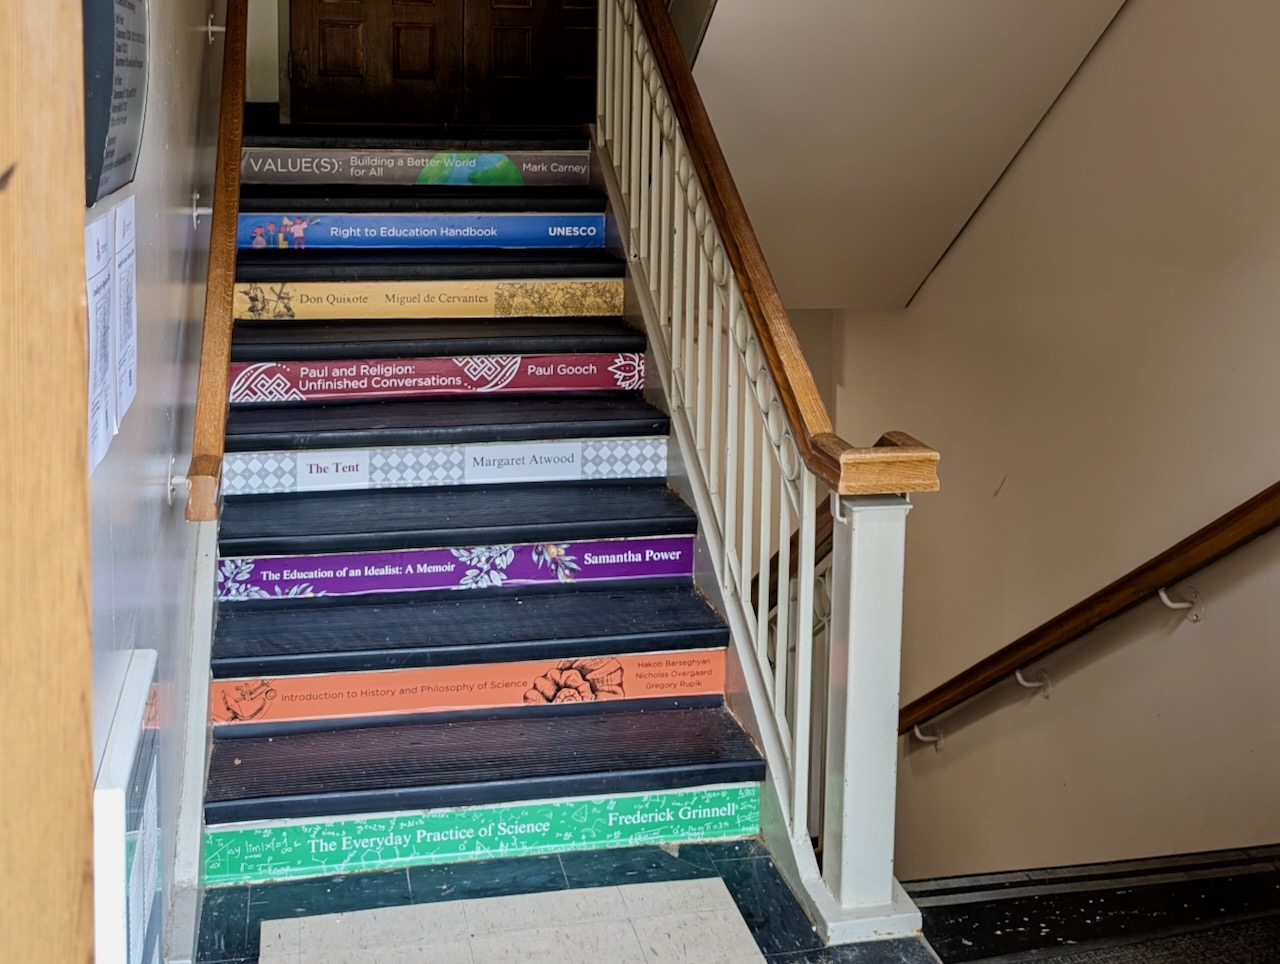 Stairs lined with decals resembling book covers in the Old Vic building.